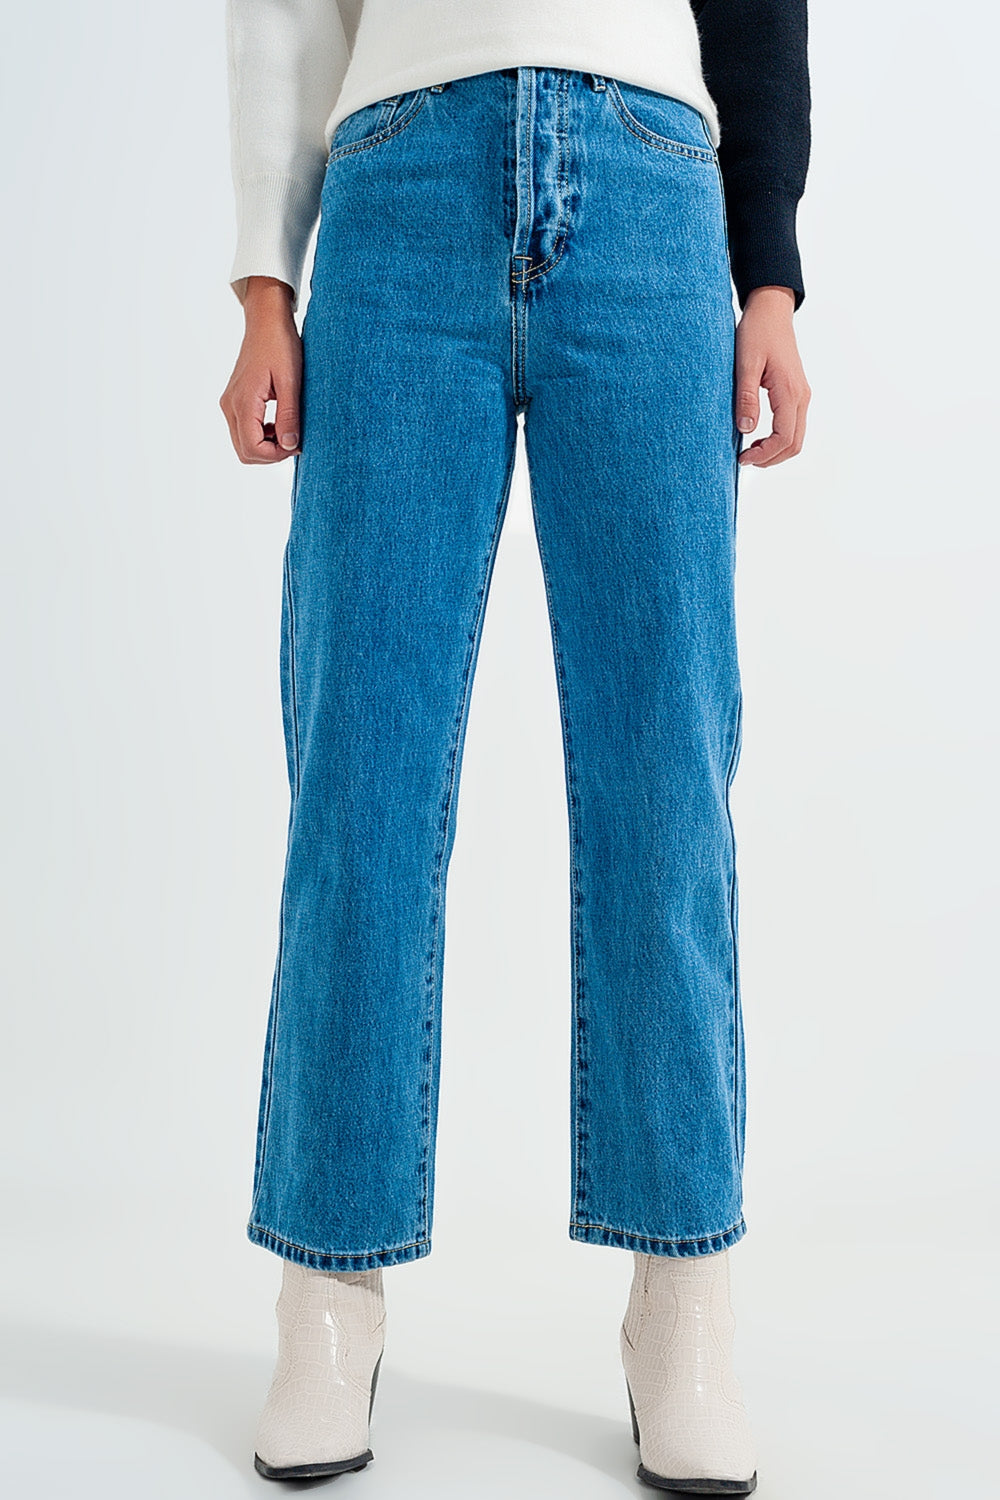 High waisted mom jeans in vintage blue